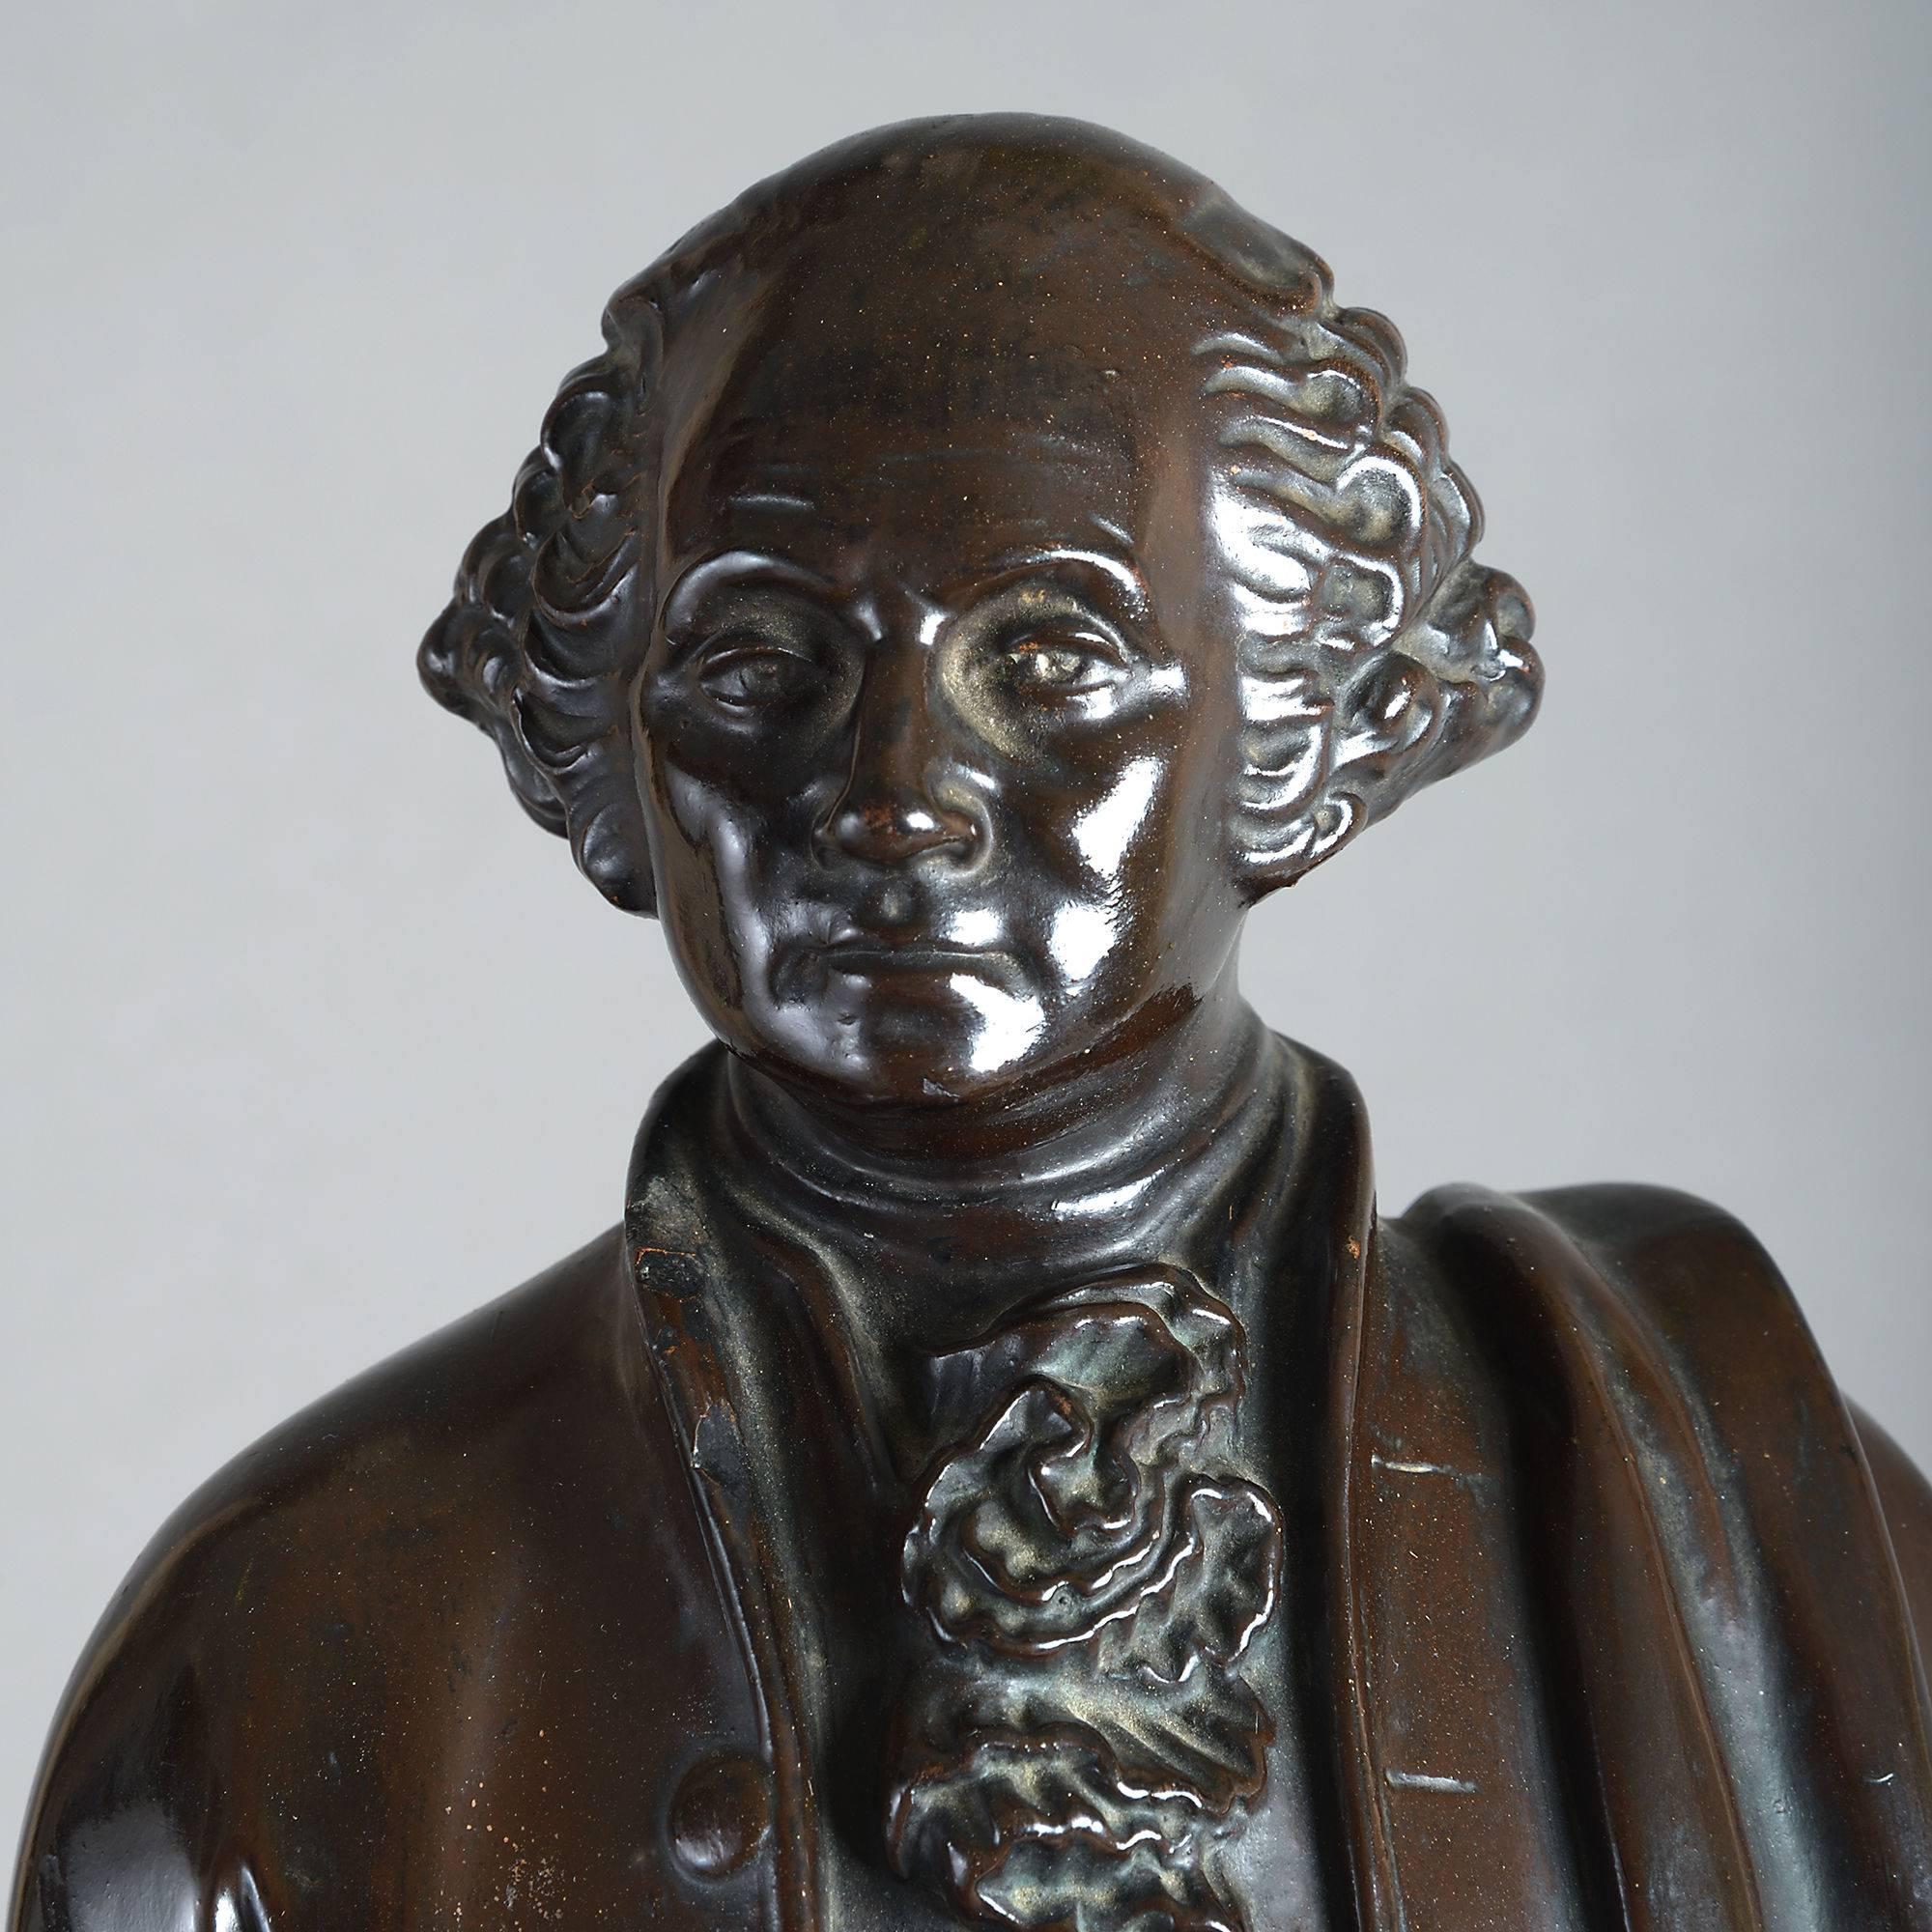 George Washington (1732-1799) 

By Rudolf Uttrecht (1840-1906) 

Terracotta with bronze patina, marked U & Co to underside. 

Rudolf Uffrecht was a German sculptor known for his terracotta portraits of historical figures including politicians,